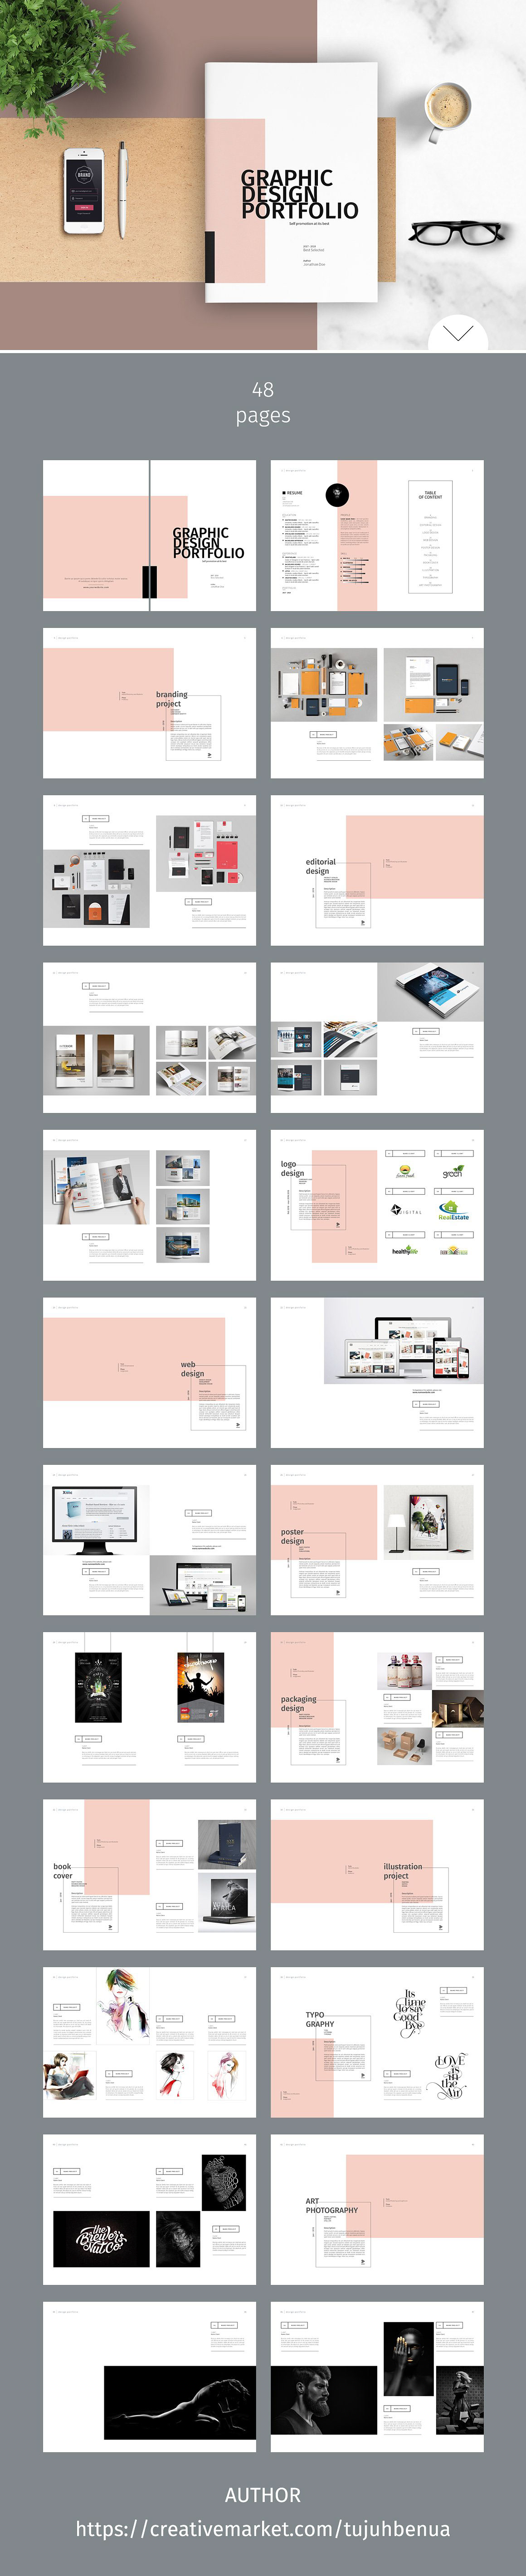 behance-template-free-download-printable-templates